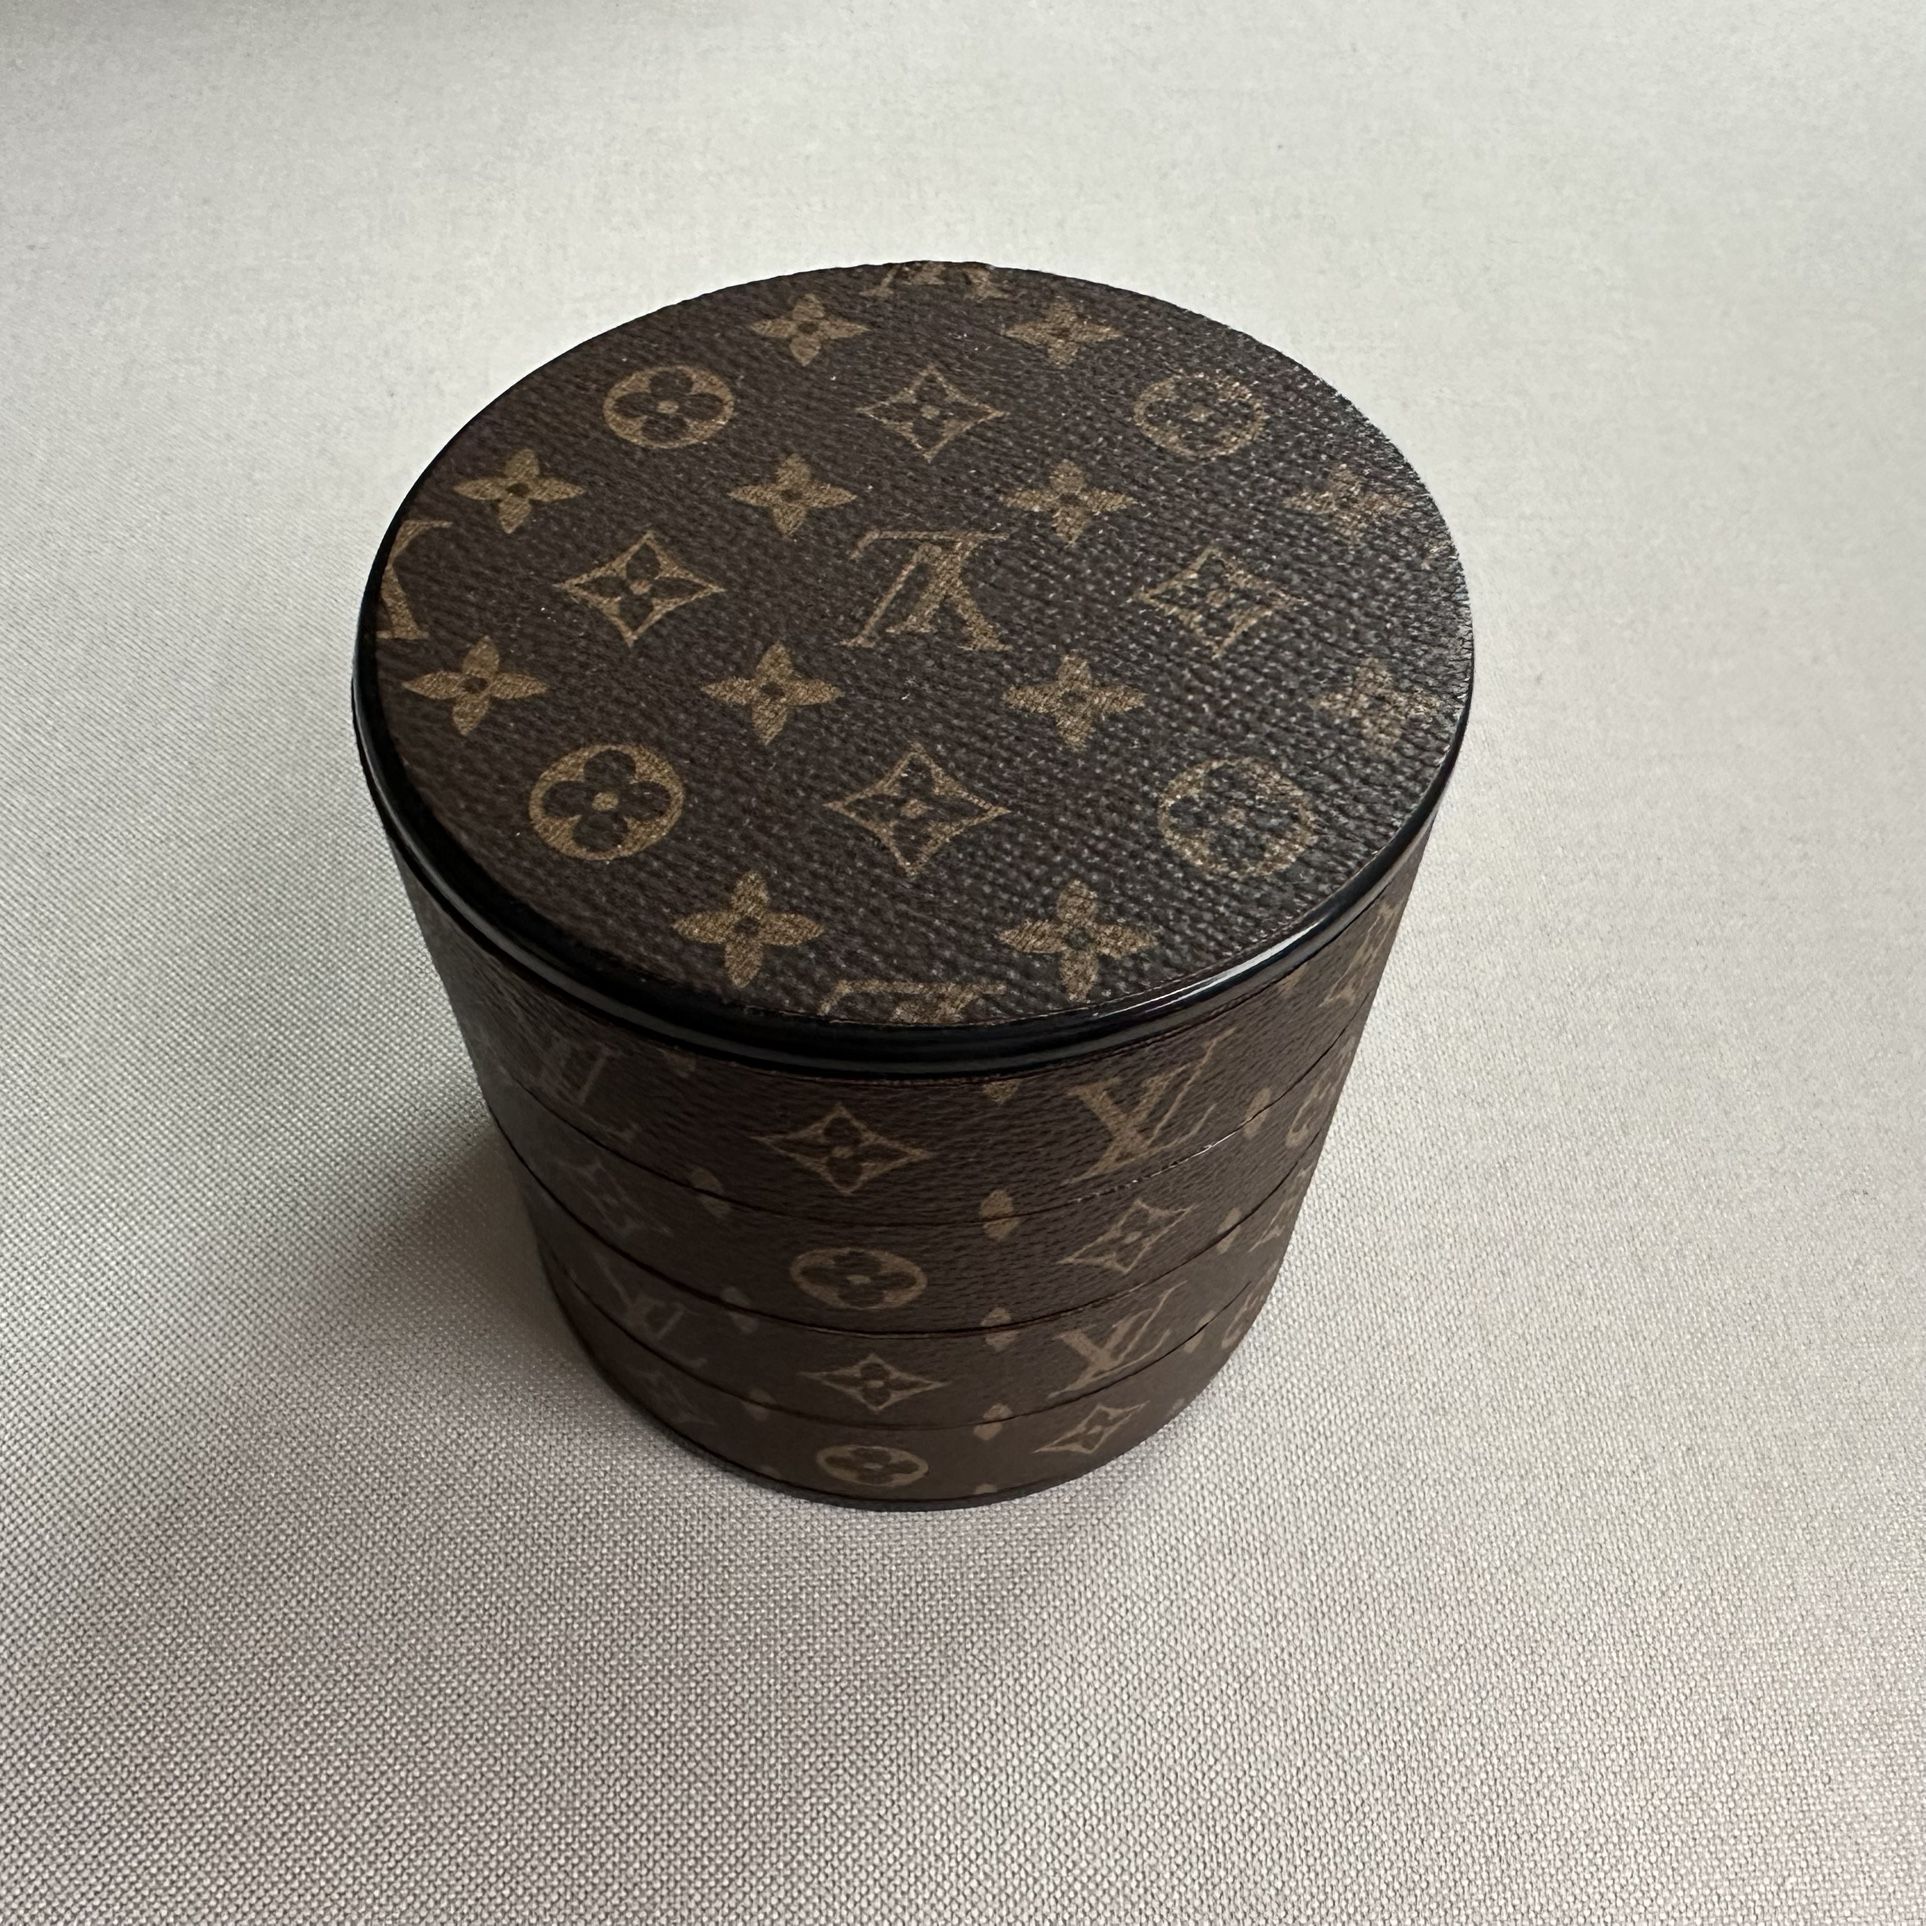 Louis Vuitton Jewelry Box Cylinder, Rotating Shelves, 4-Tier, With Mirror